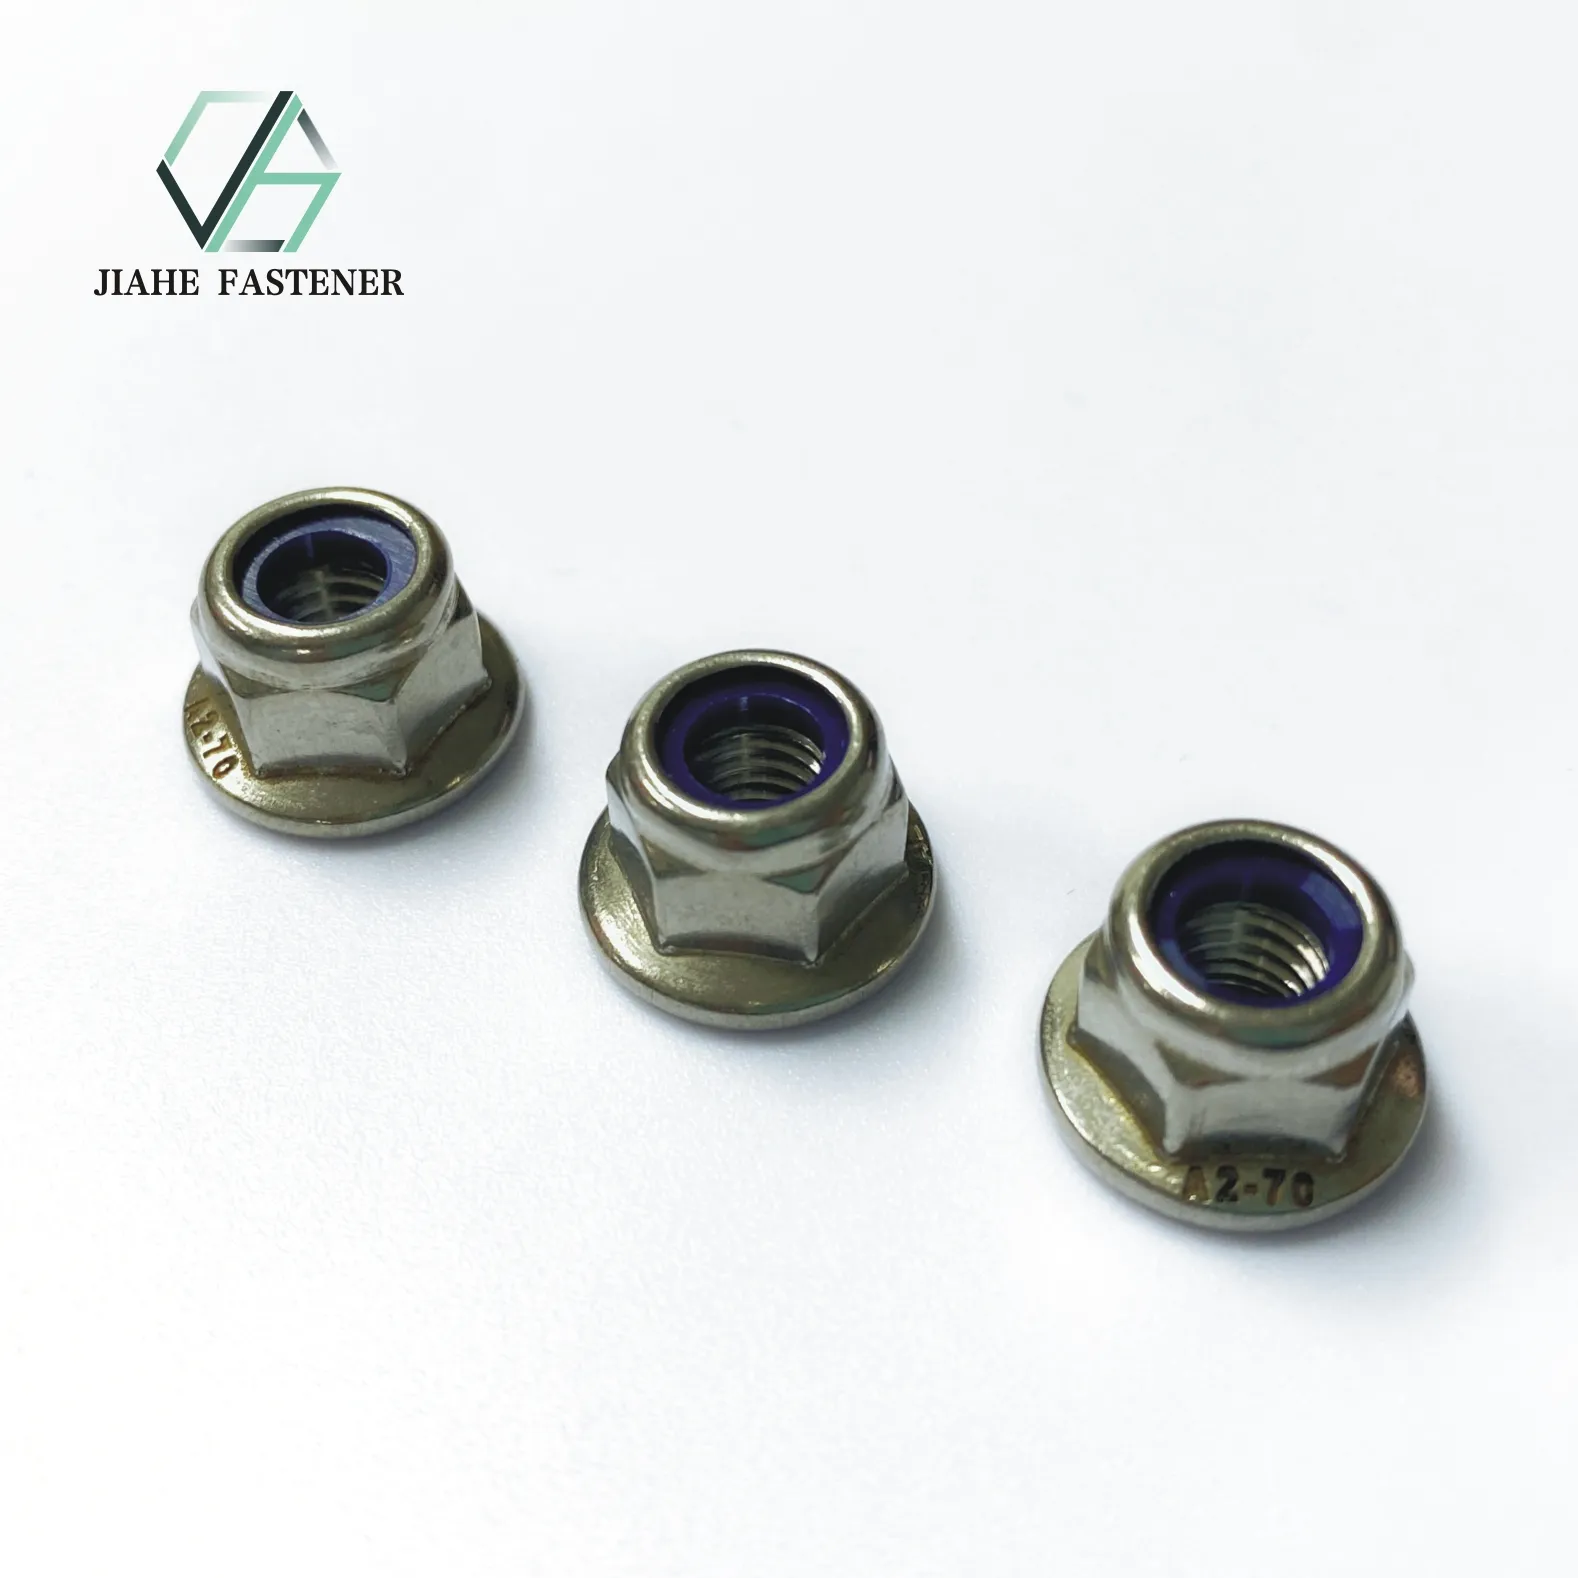 DIN6926 Hex flange nylon lock nuts Self Locking Nuts with nylon insert stainless steel M6 M8 M10 M12